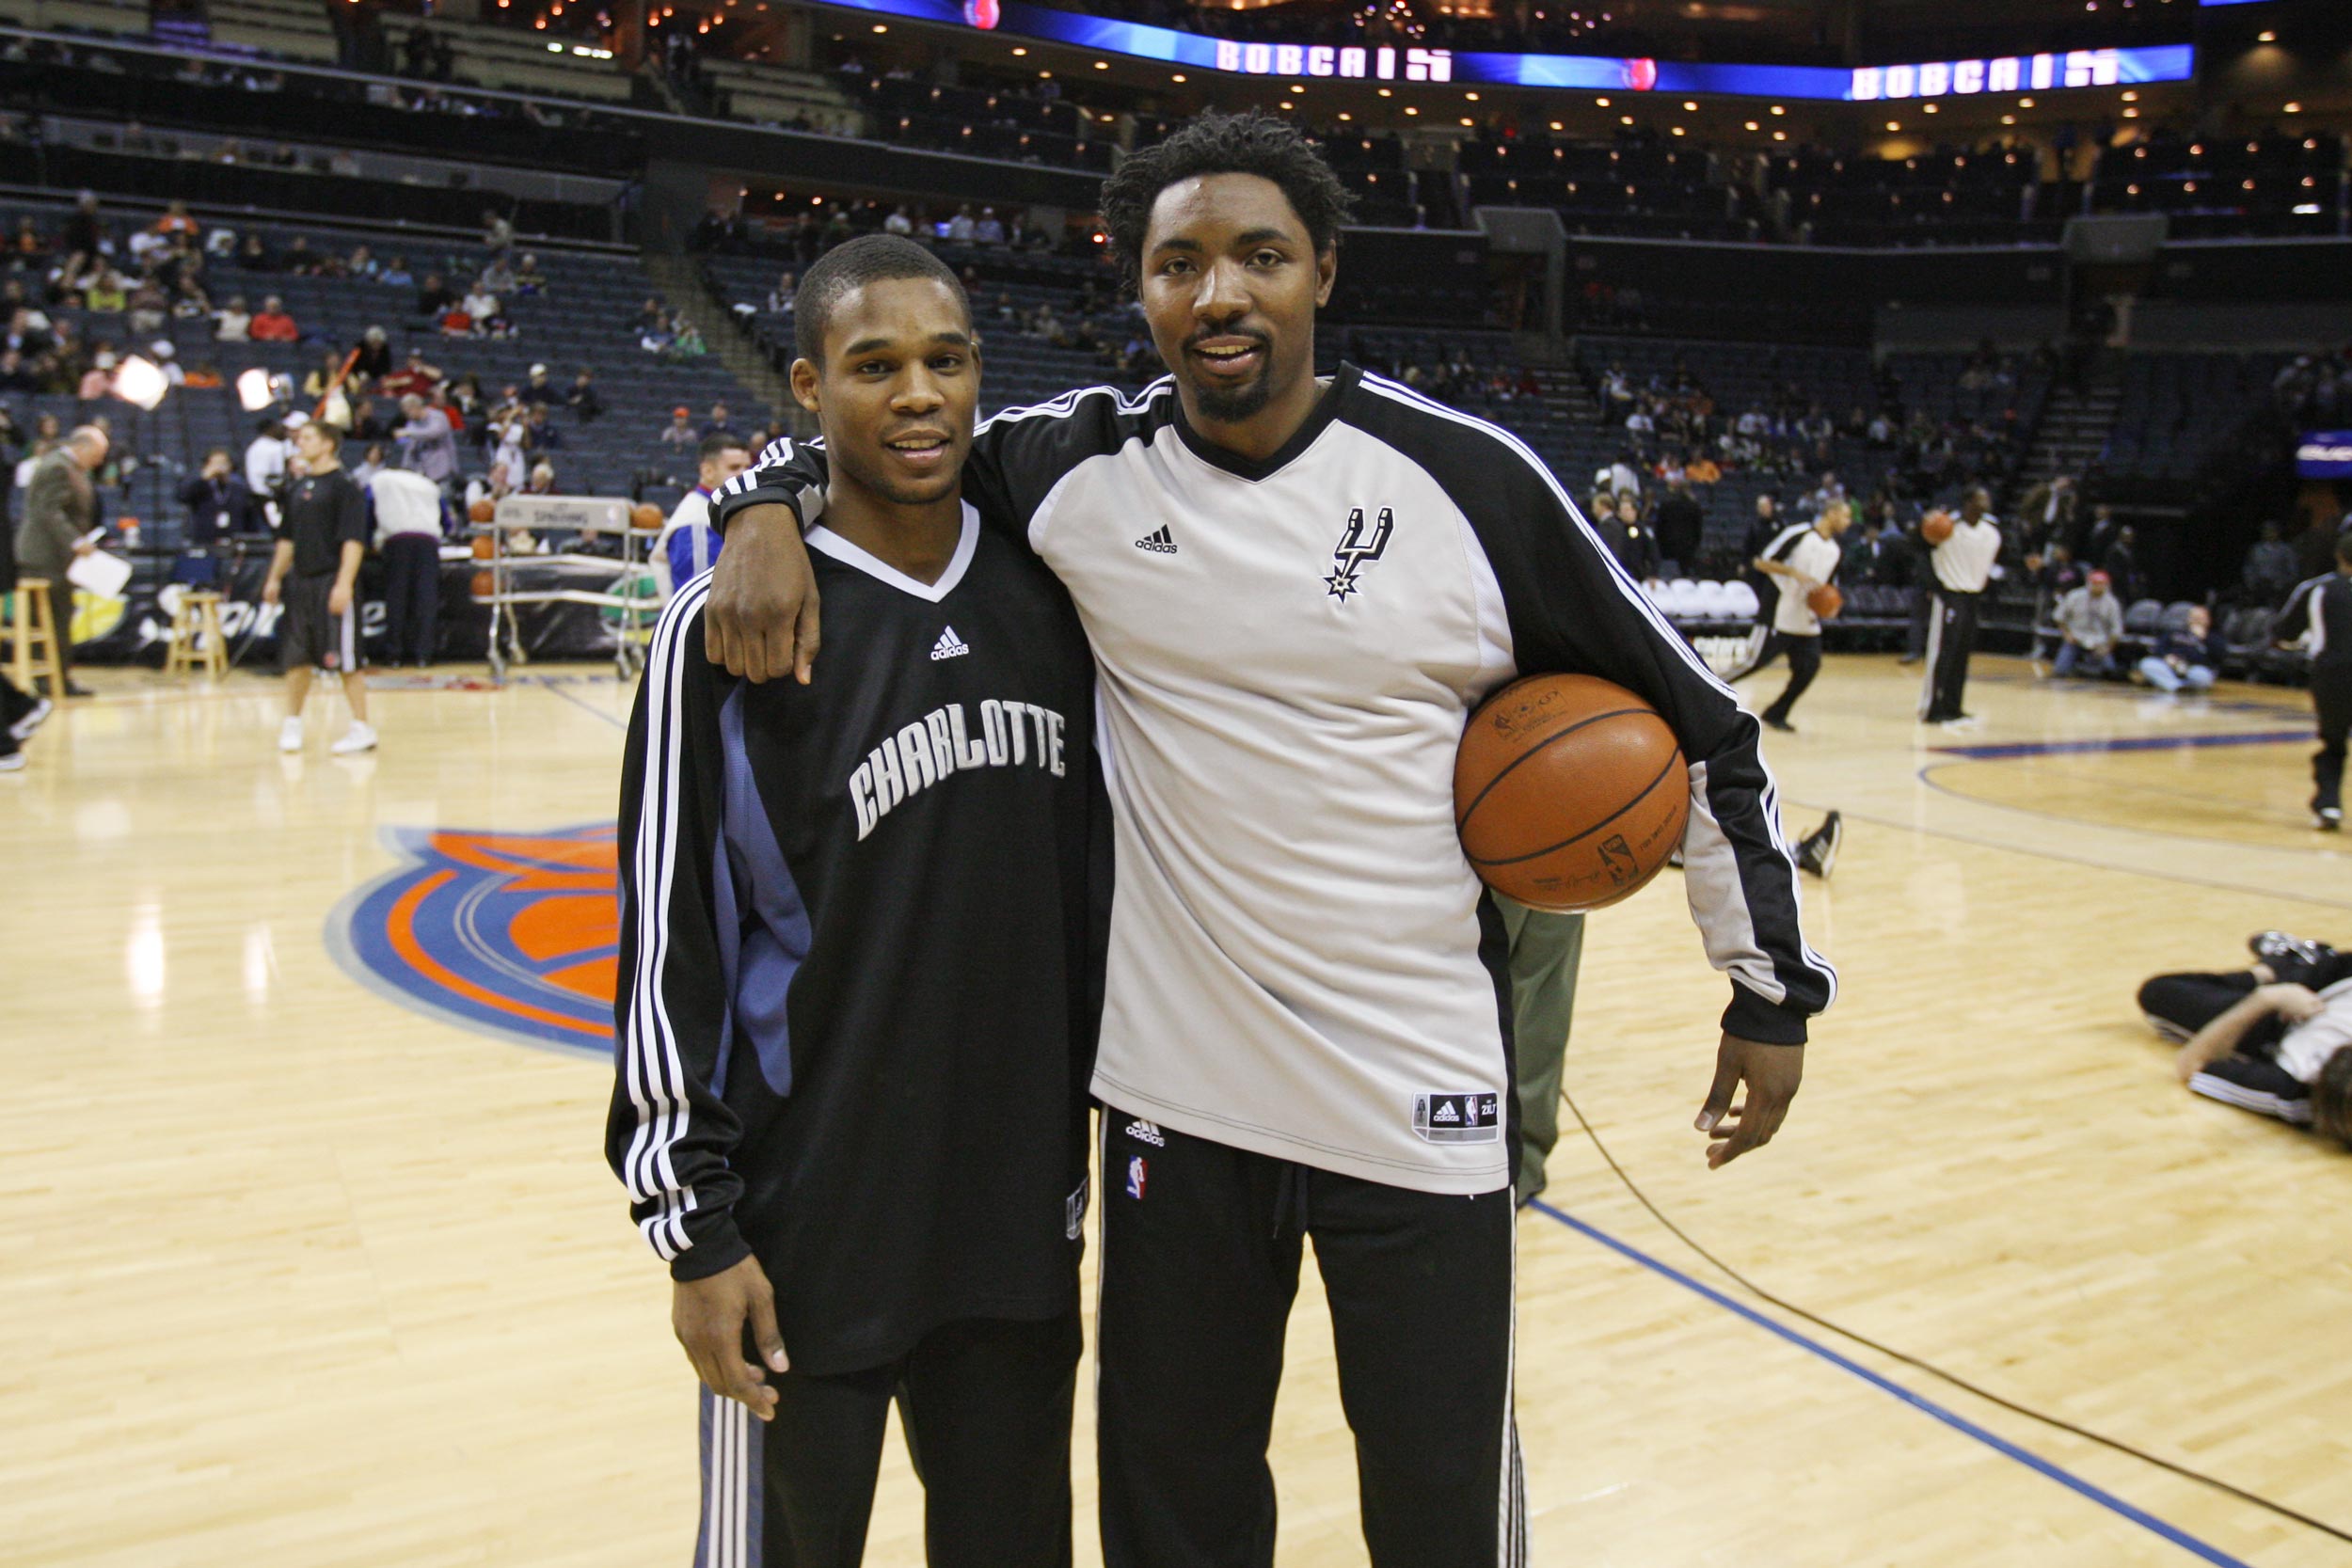 Singletary, left, and Roger Mason Jr., right, pose for a picture before an NBA game